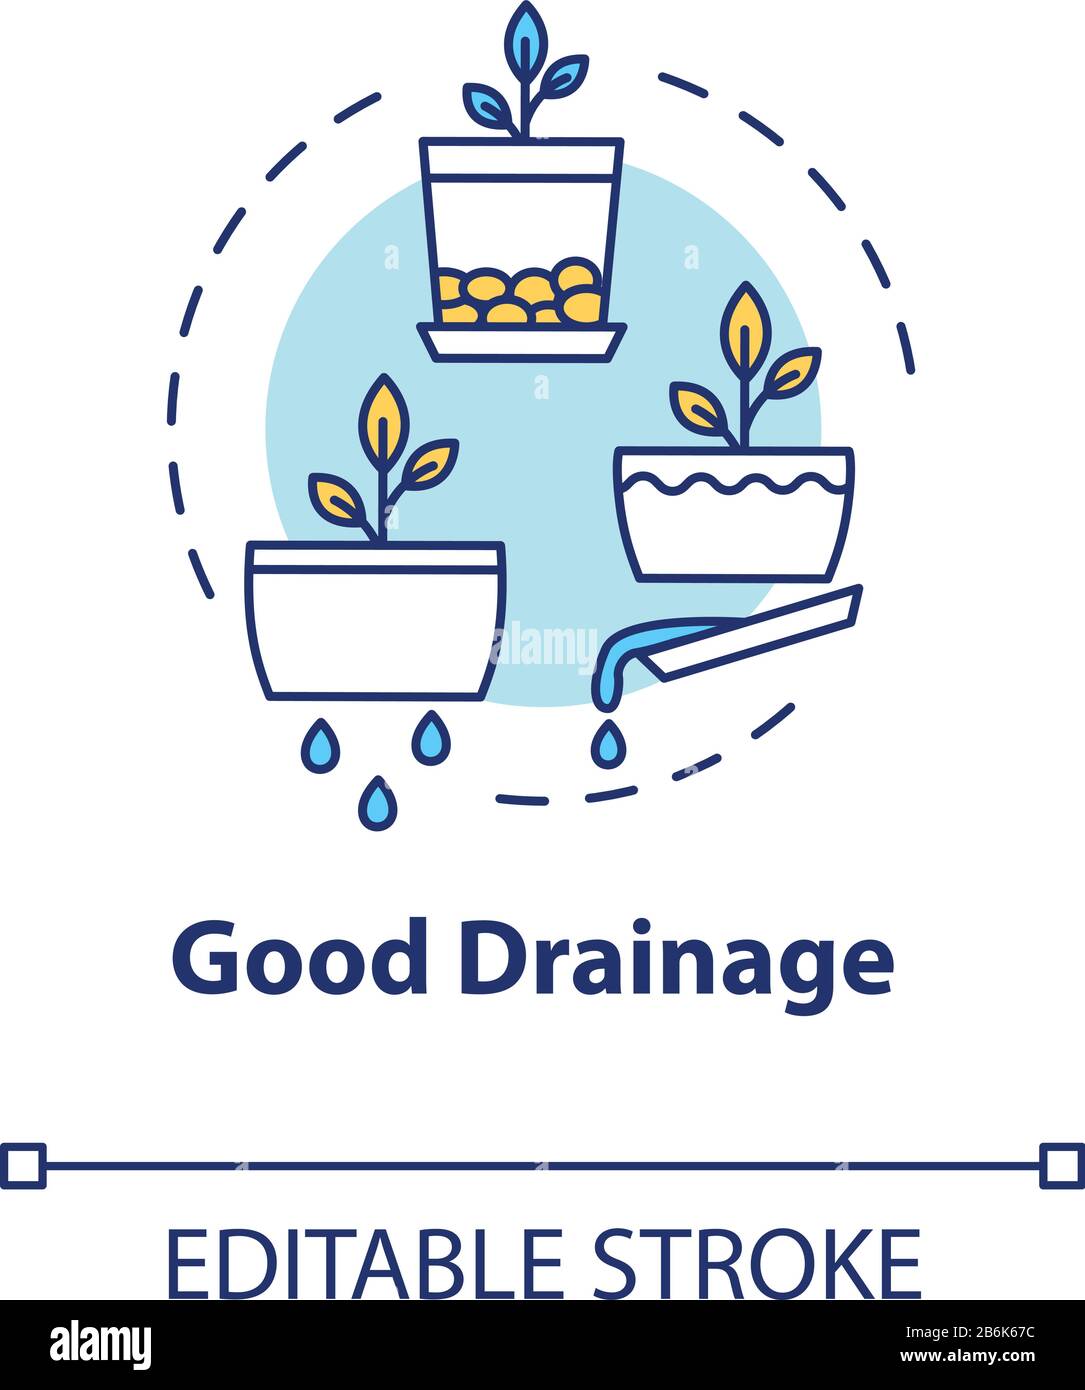 Good drainage concept icon. Home gardening tip. Houseplants caring. Plant nursing, floristry hobby idea thin line illustration. Vector isolated Stock Vector